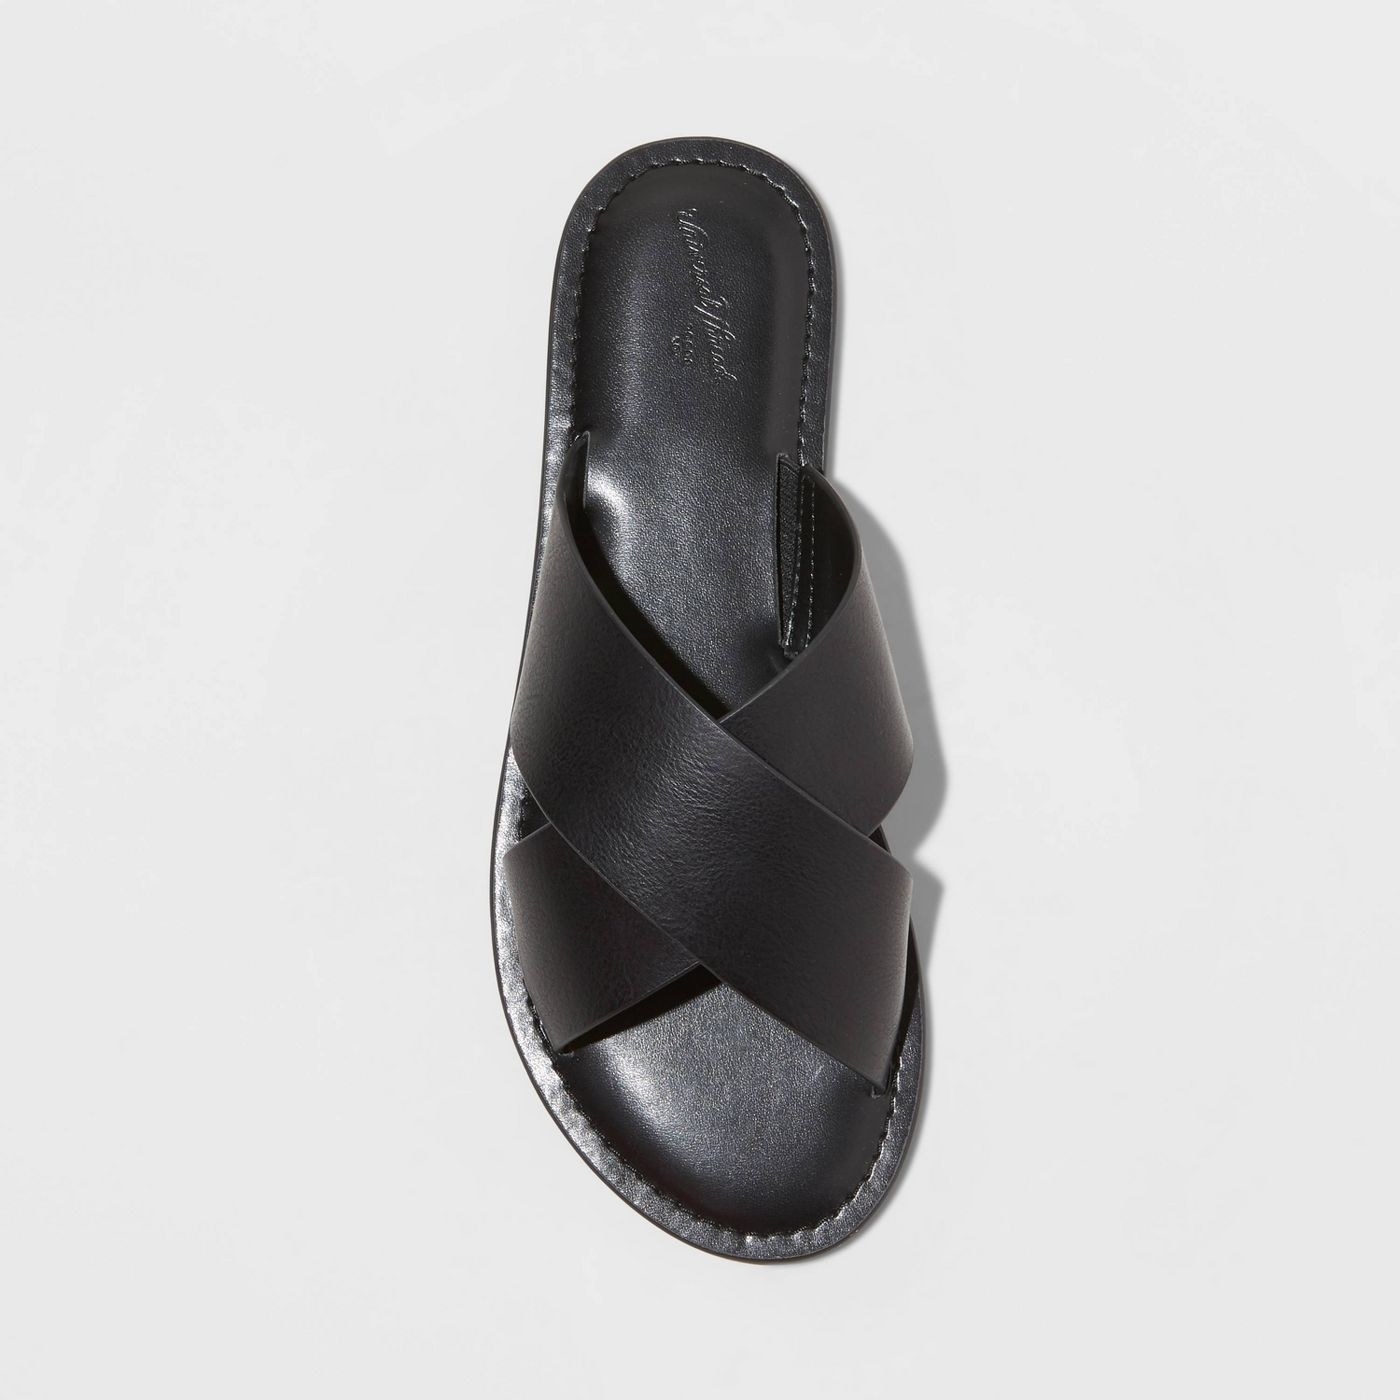 A black faux leather slide sandal with crossband straps